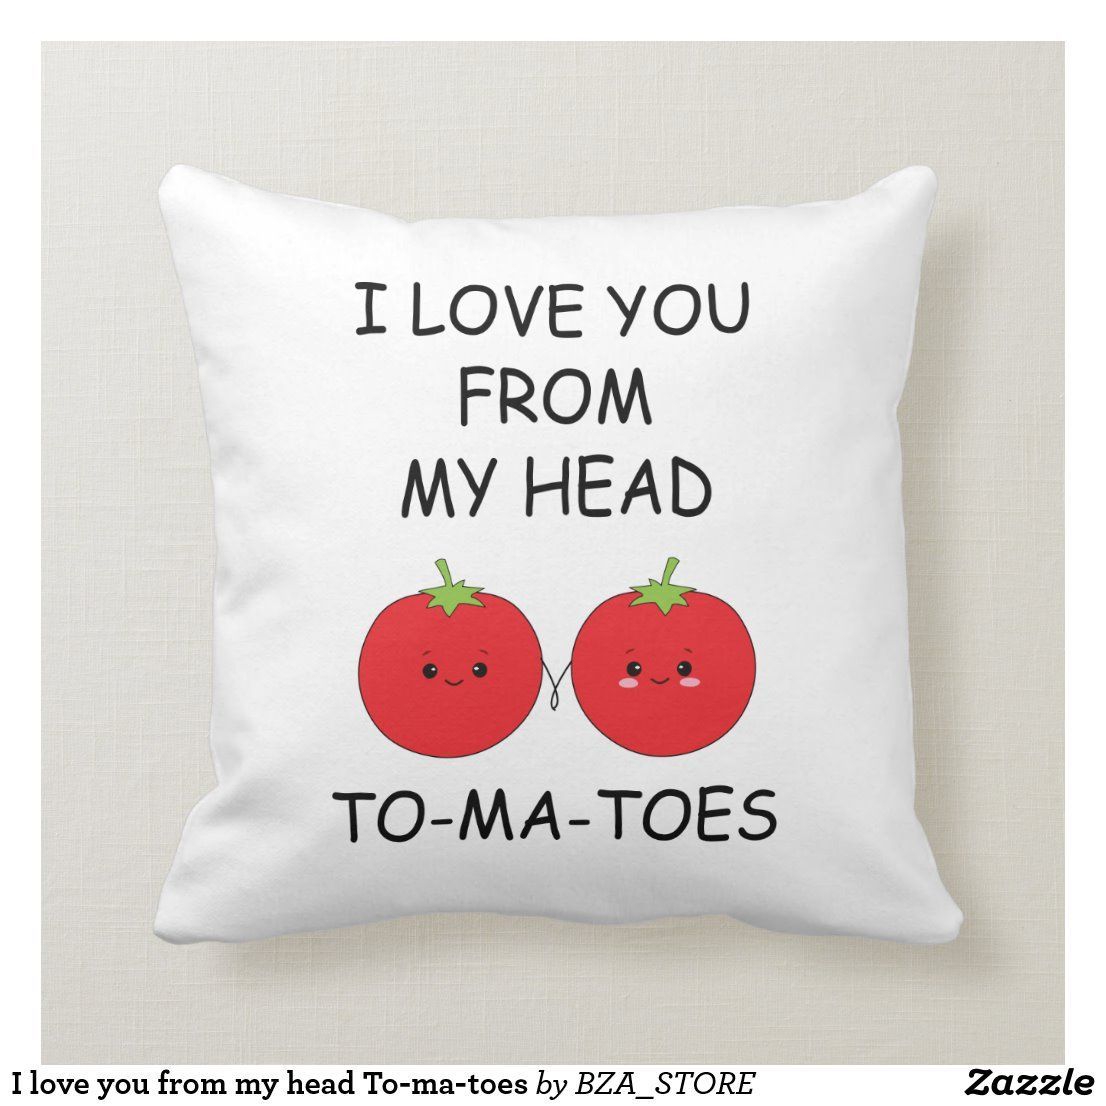 I love you from my head To-ma-toes Throw Pillow - I love you from my head To-ma-toes Throw Pillow -   18 diy Pillows for boyfriend ideas